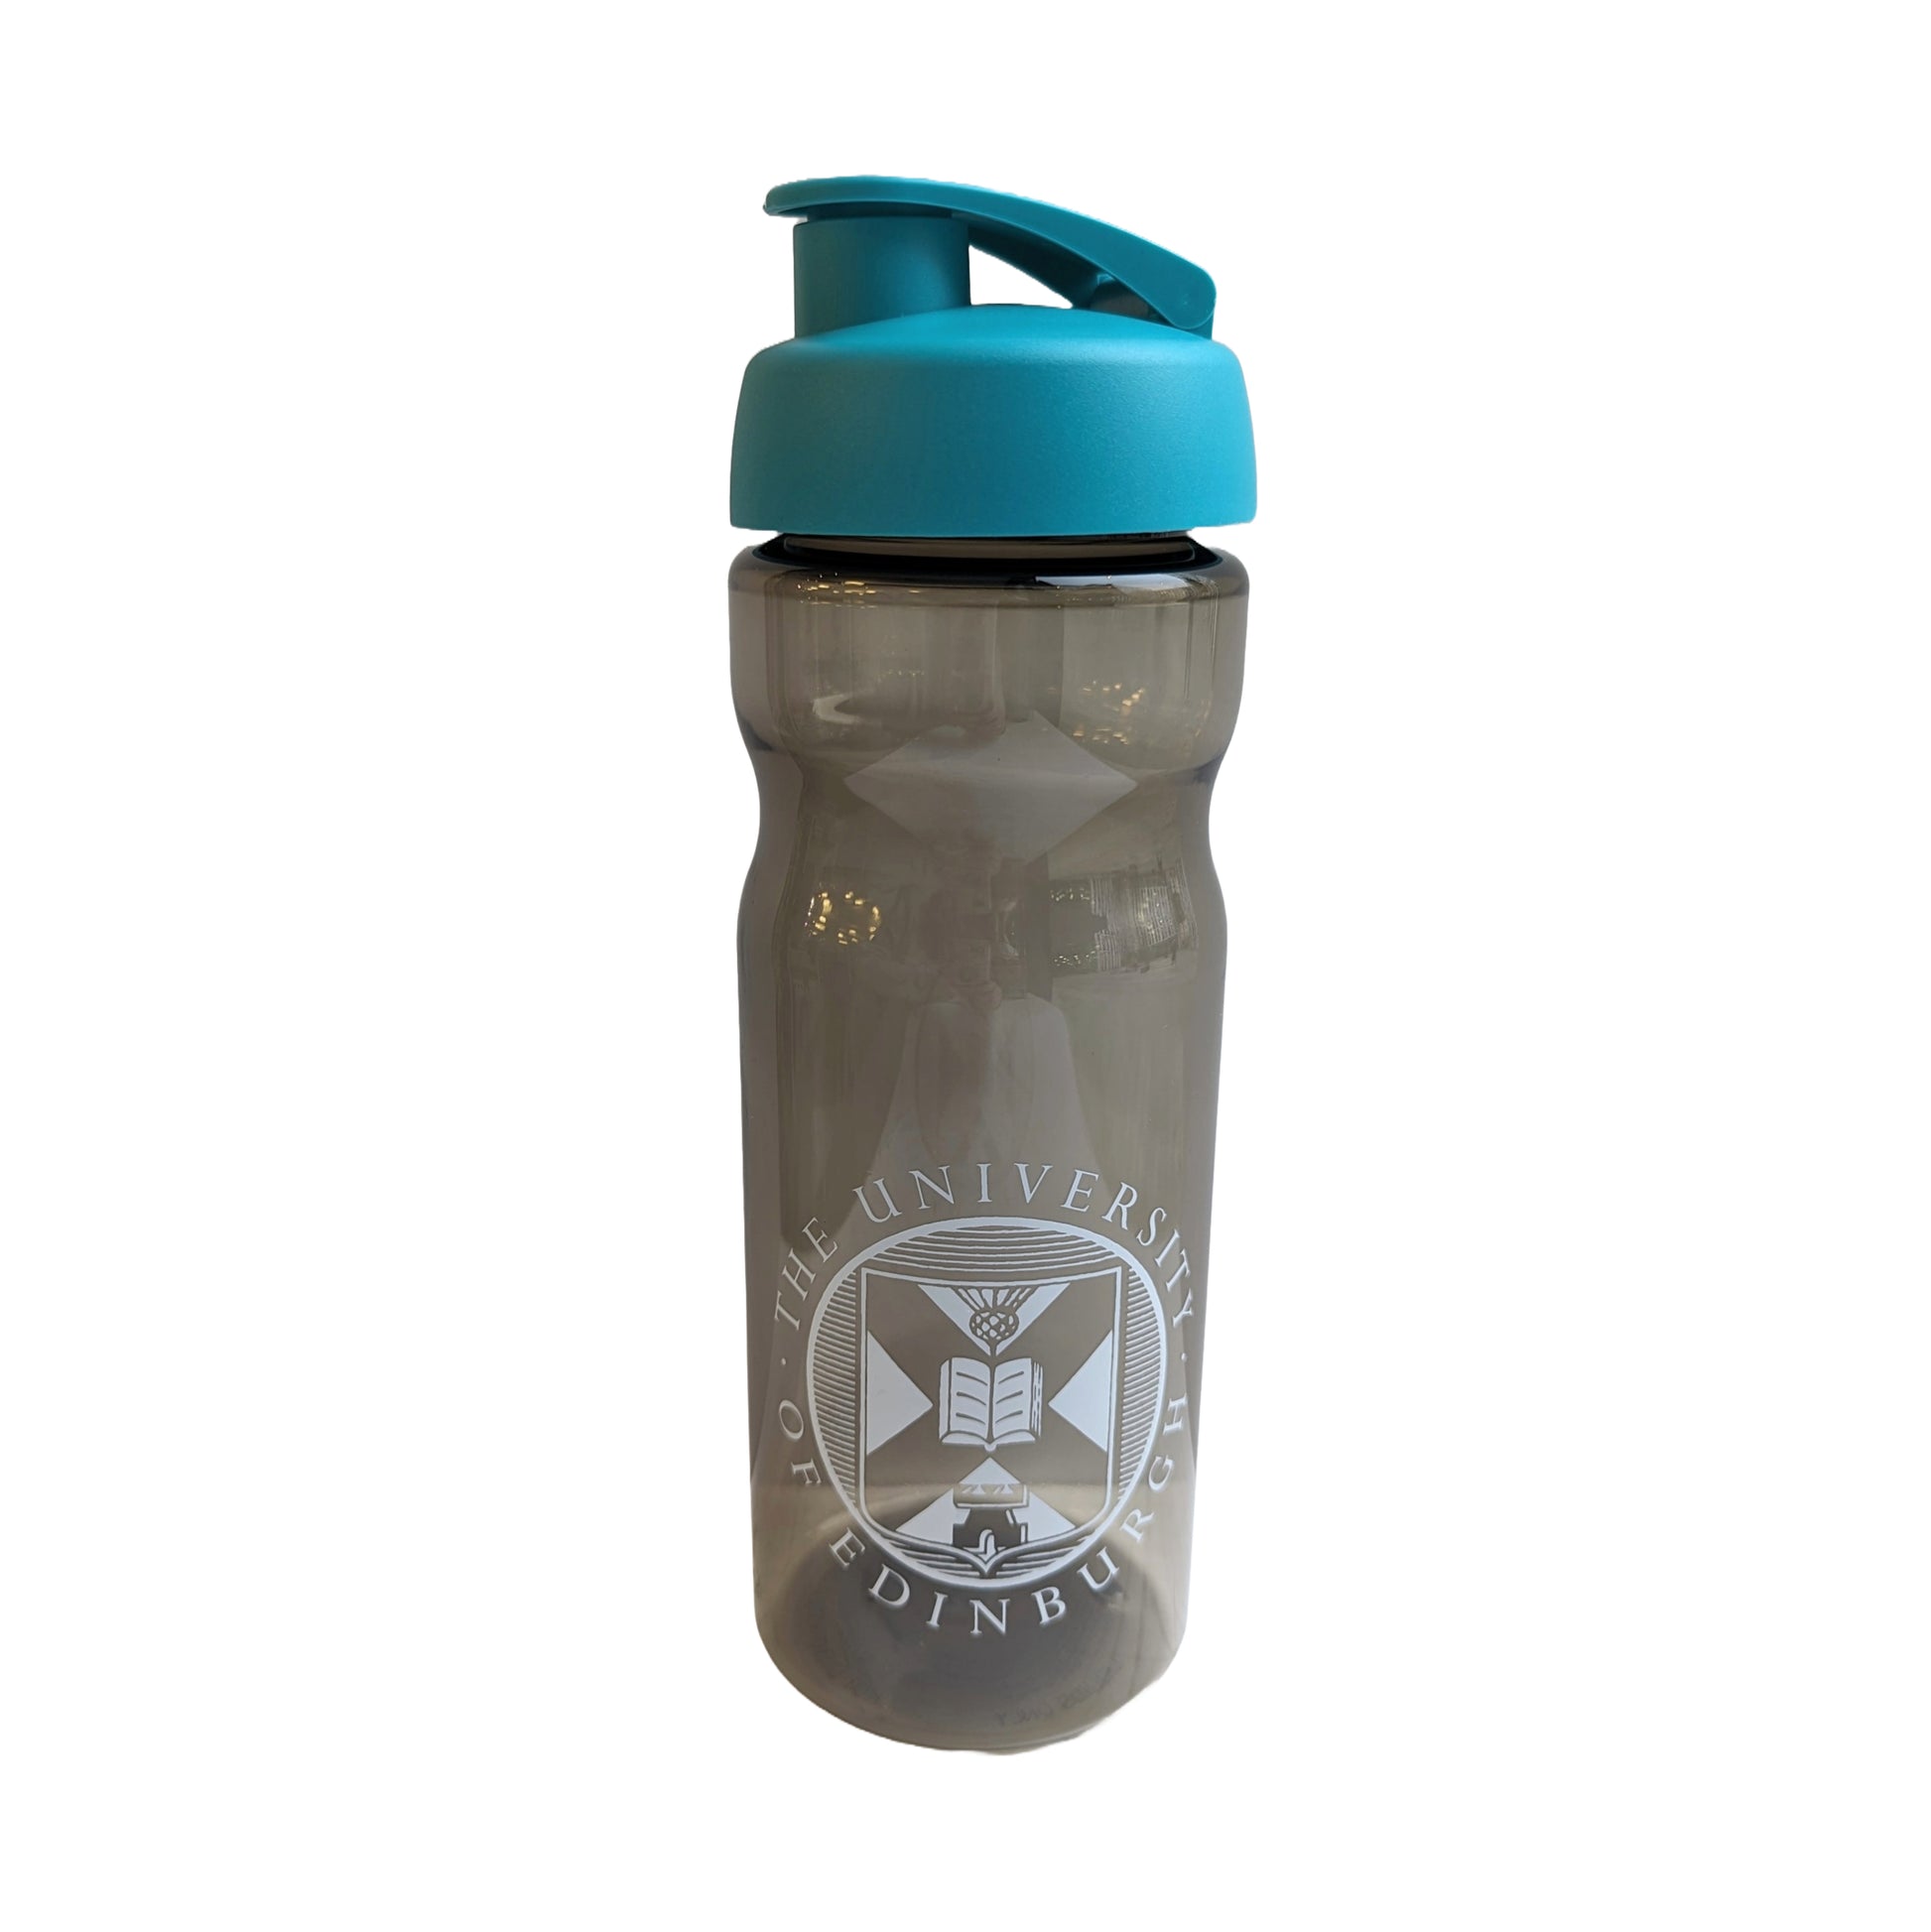 An opaque dark grey water bottle with a white university crest and a blue/teal cap